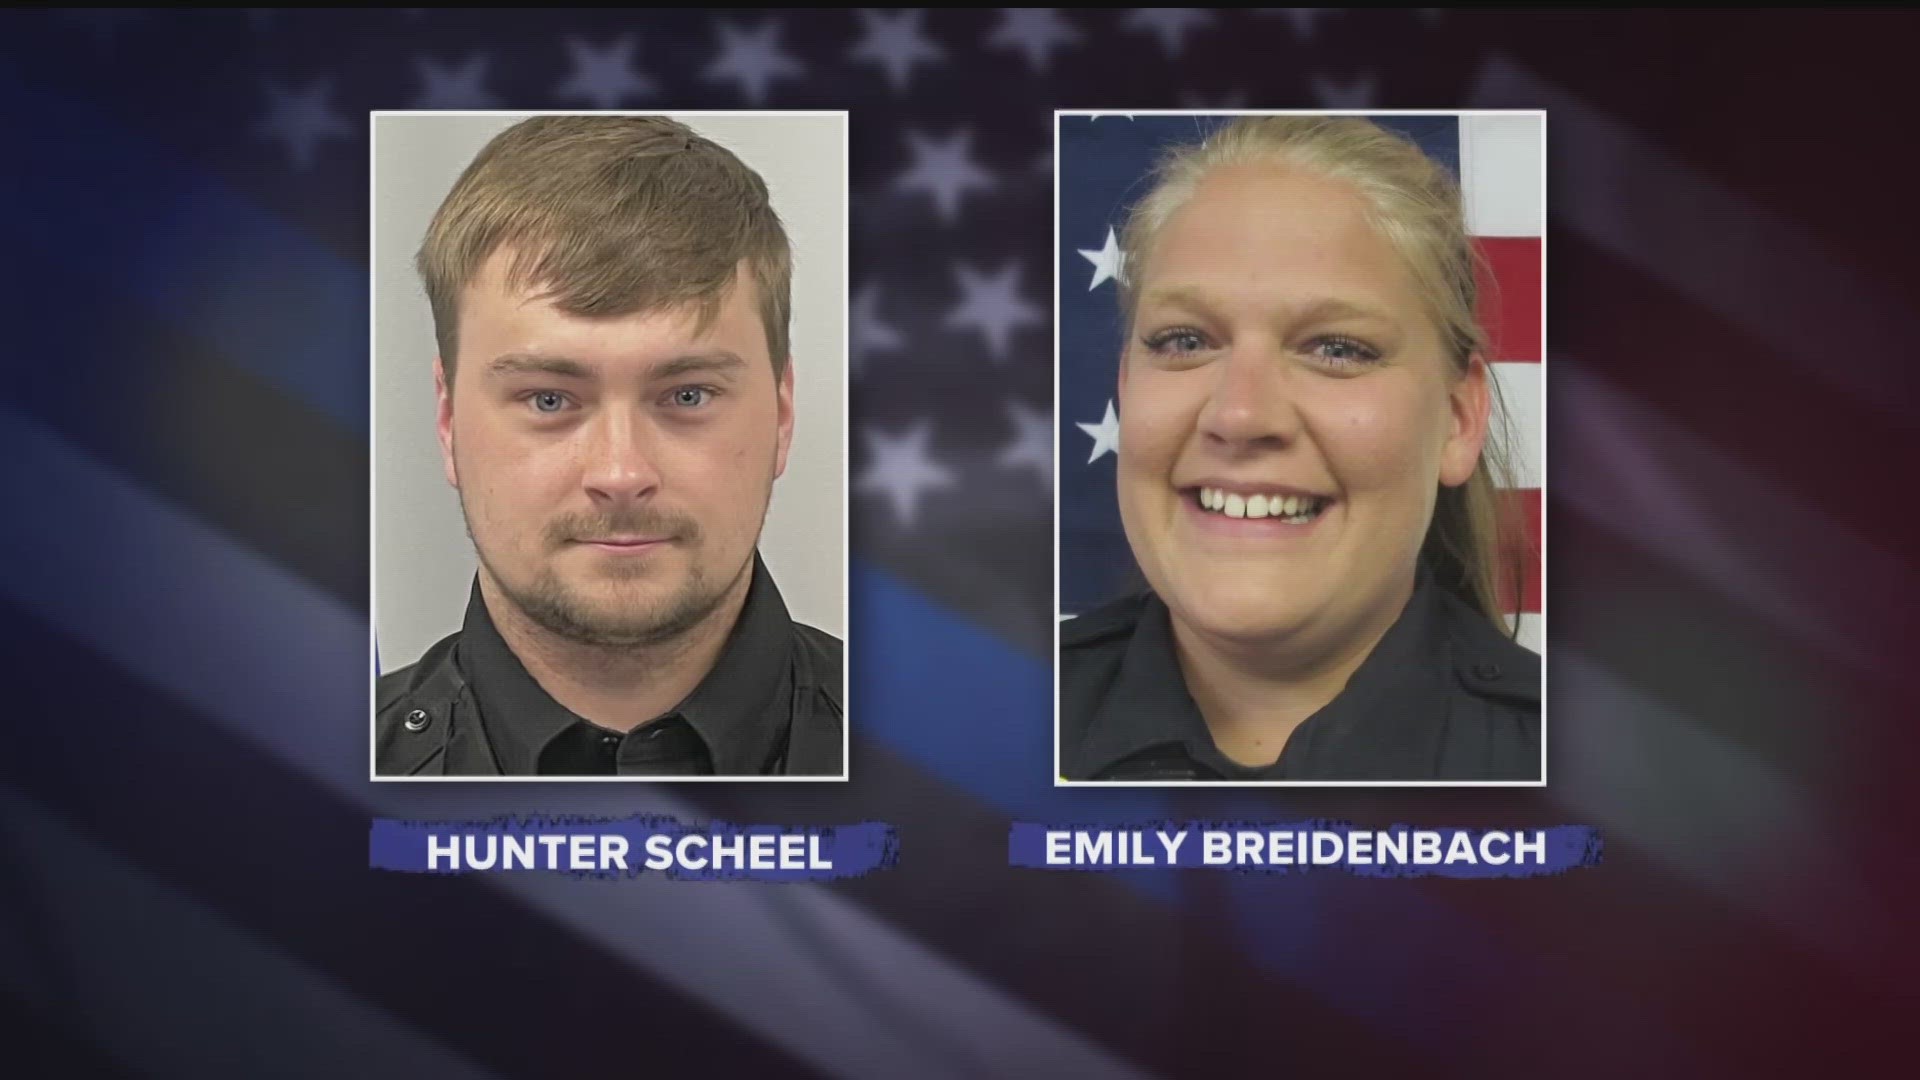 Chetek police officer Emily Breidenbach and Cameron officer Hunter Scheel were killed April 8 after pulling over a man who was wanted on a warrant.